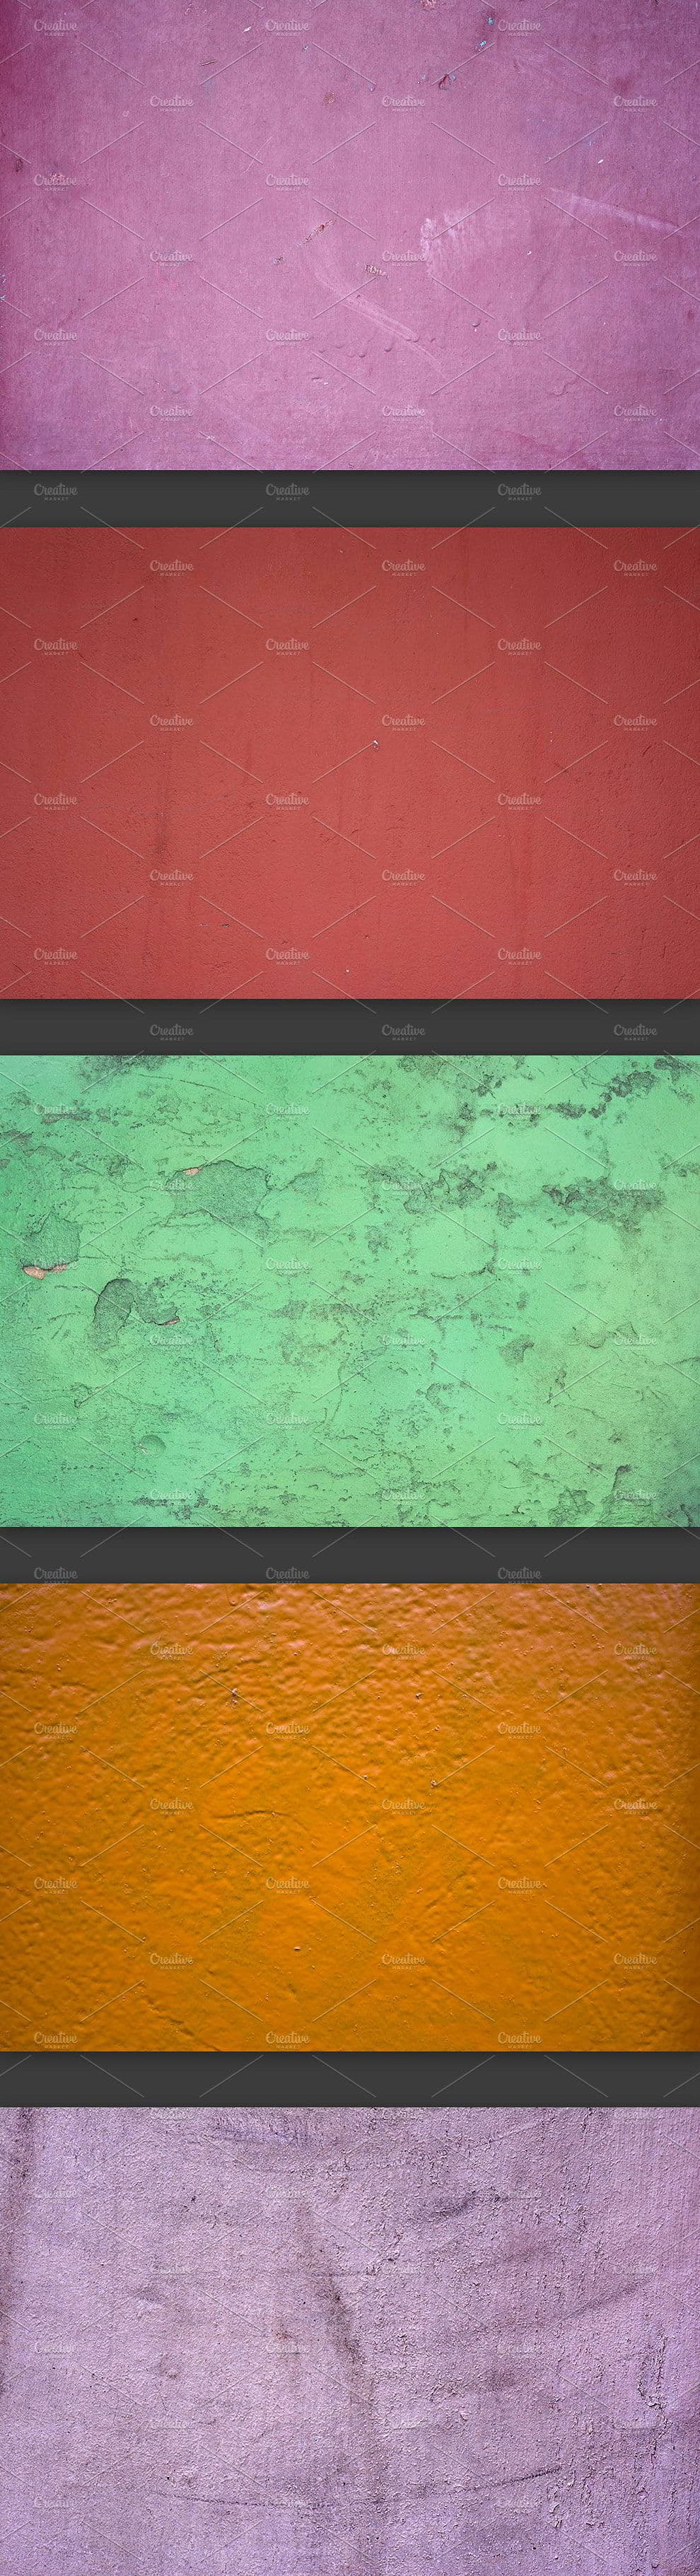 Creativemarket 10 Colored Wall Textures